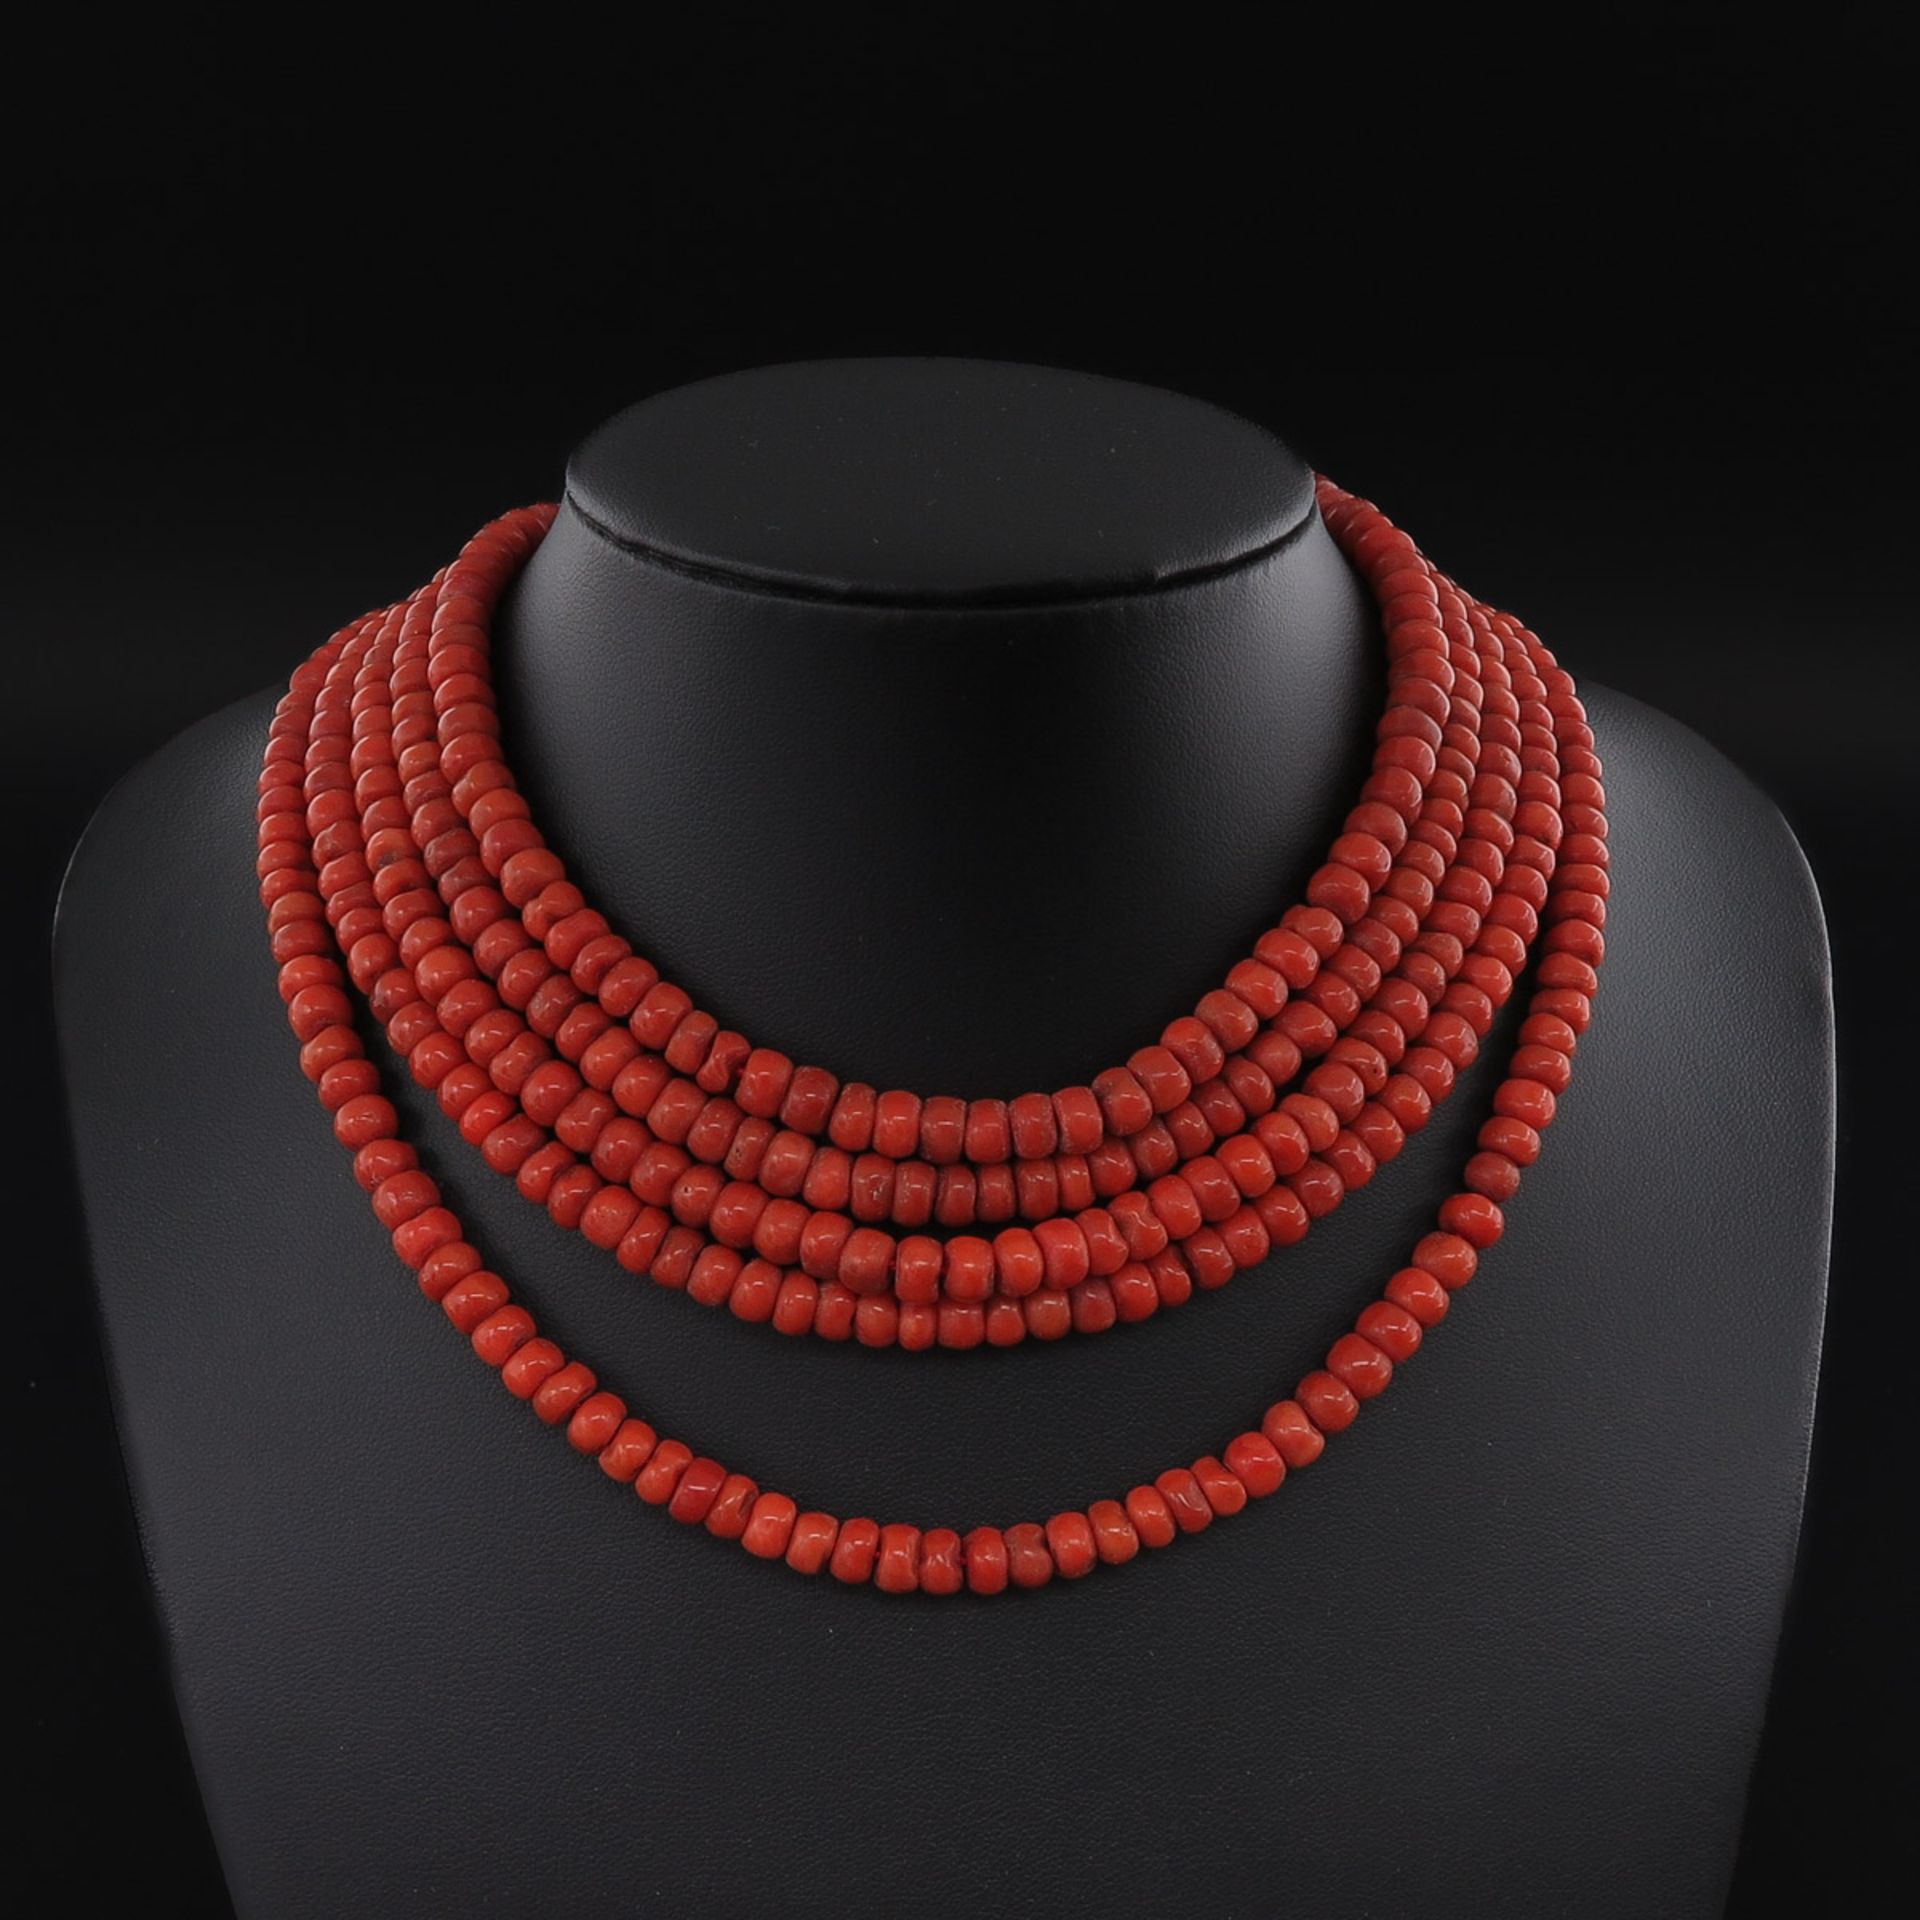 A 19th Century 5 Strand Red Coral Necklace - Image 4 of 4